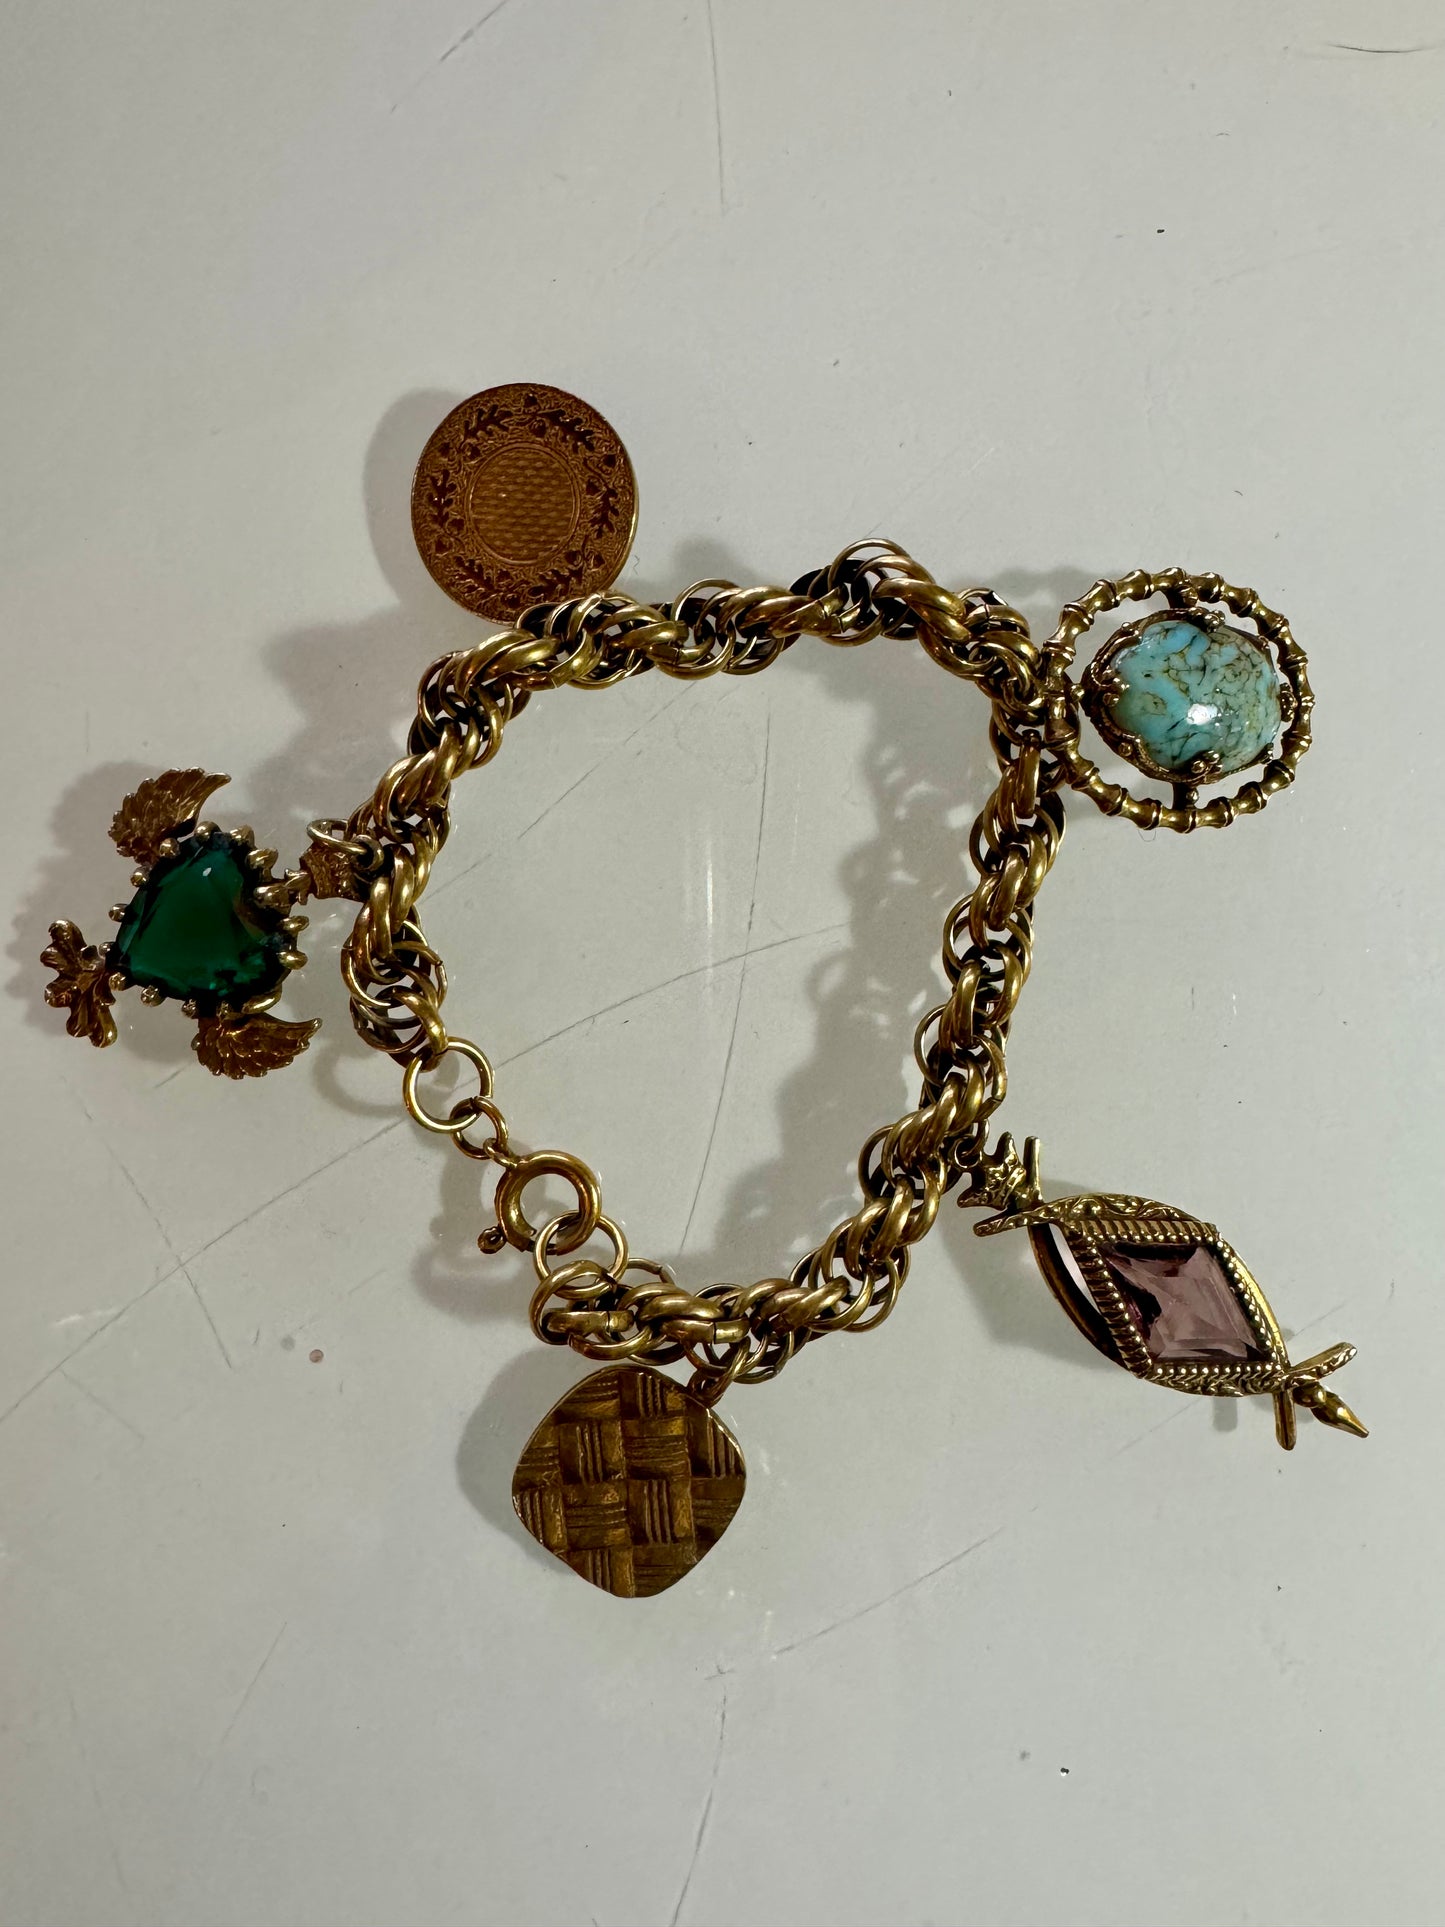 Vintage 1950s charm bracelet with 5 charms